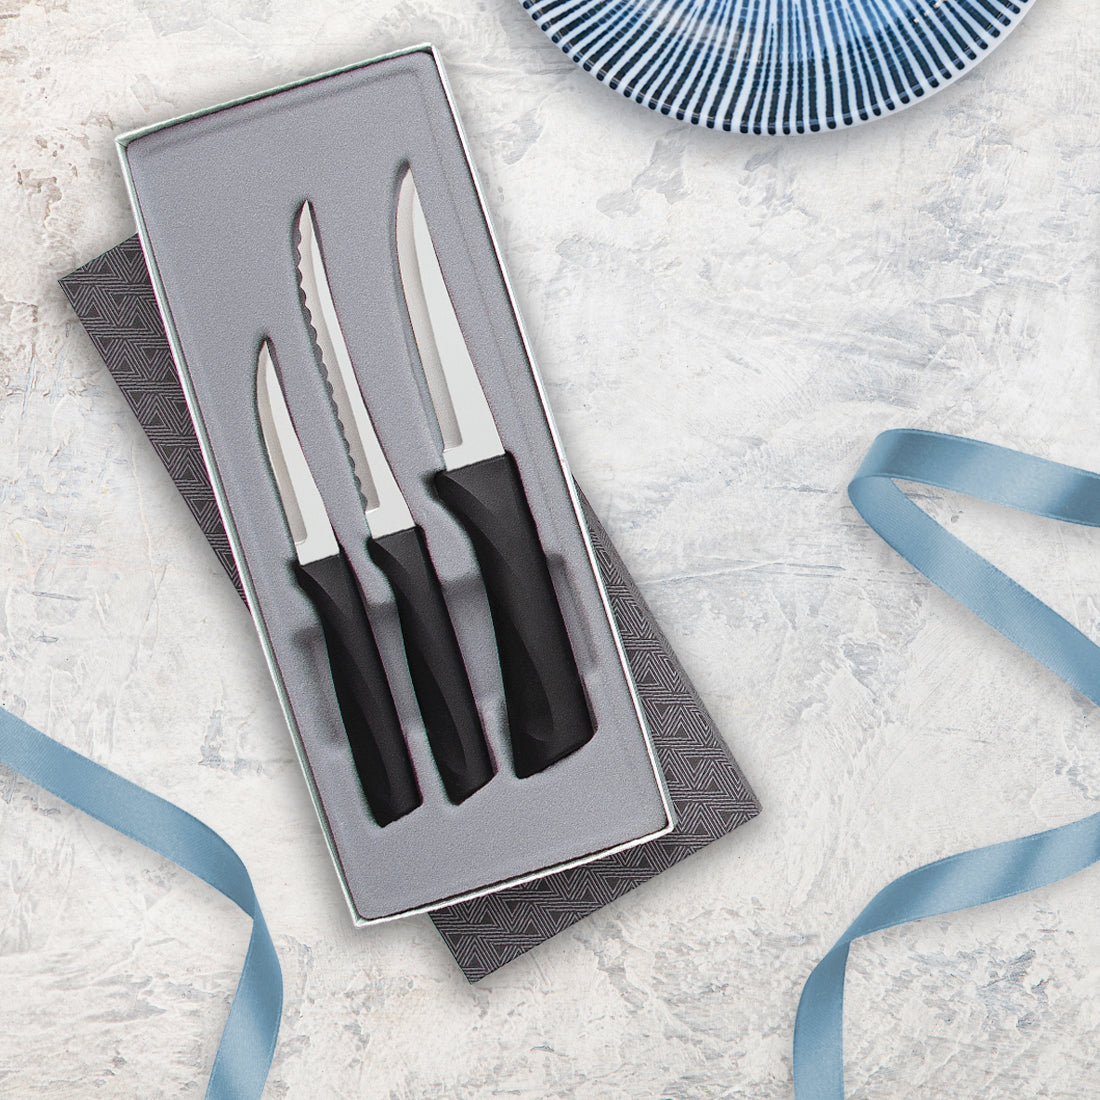 Rada Cutlery Starter Knives Gift Set – Stainless Steel Blades and